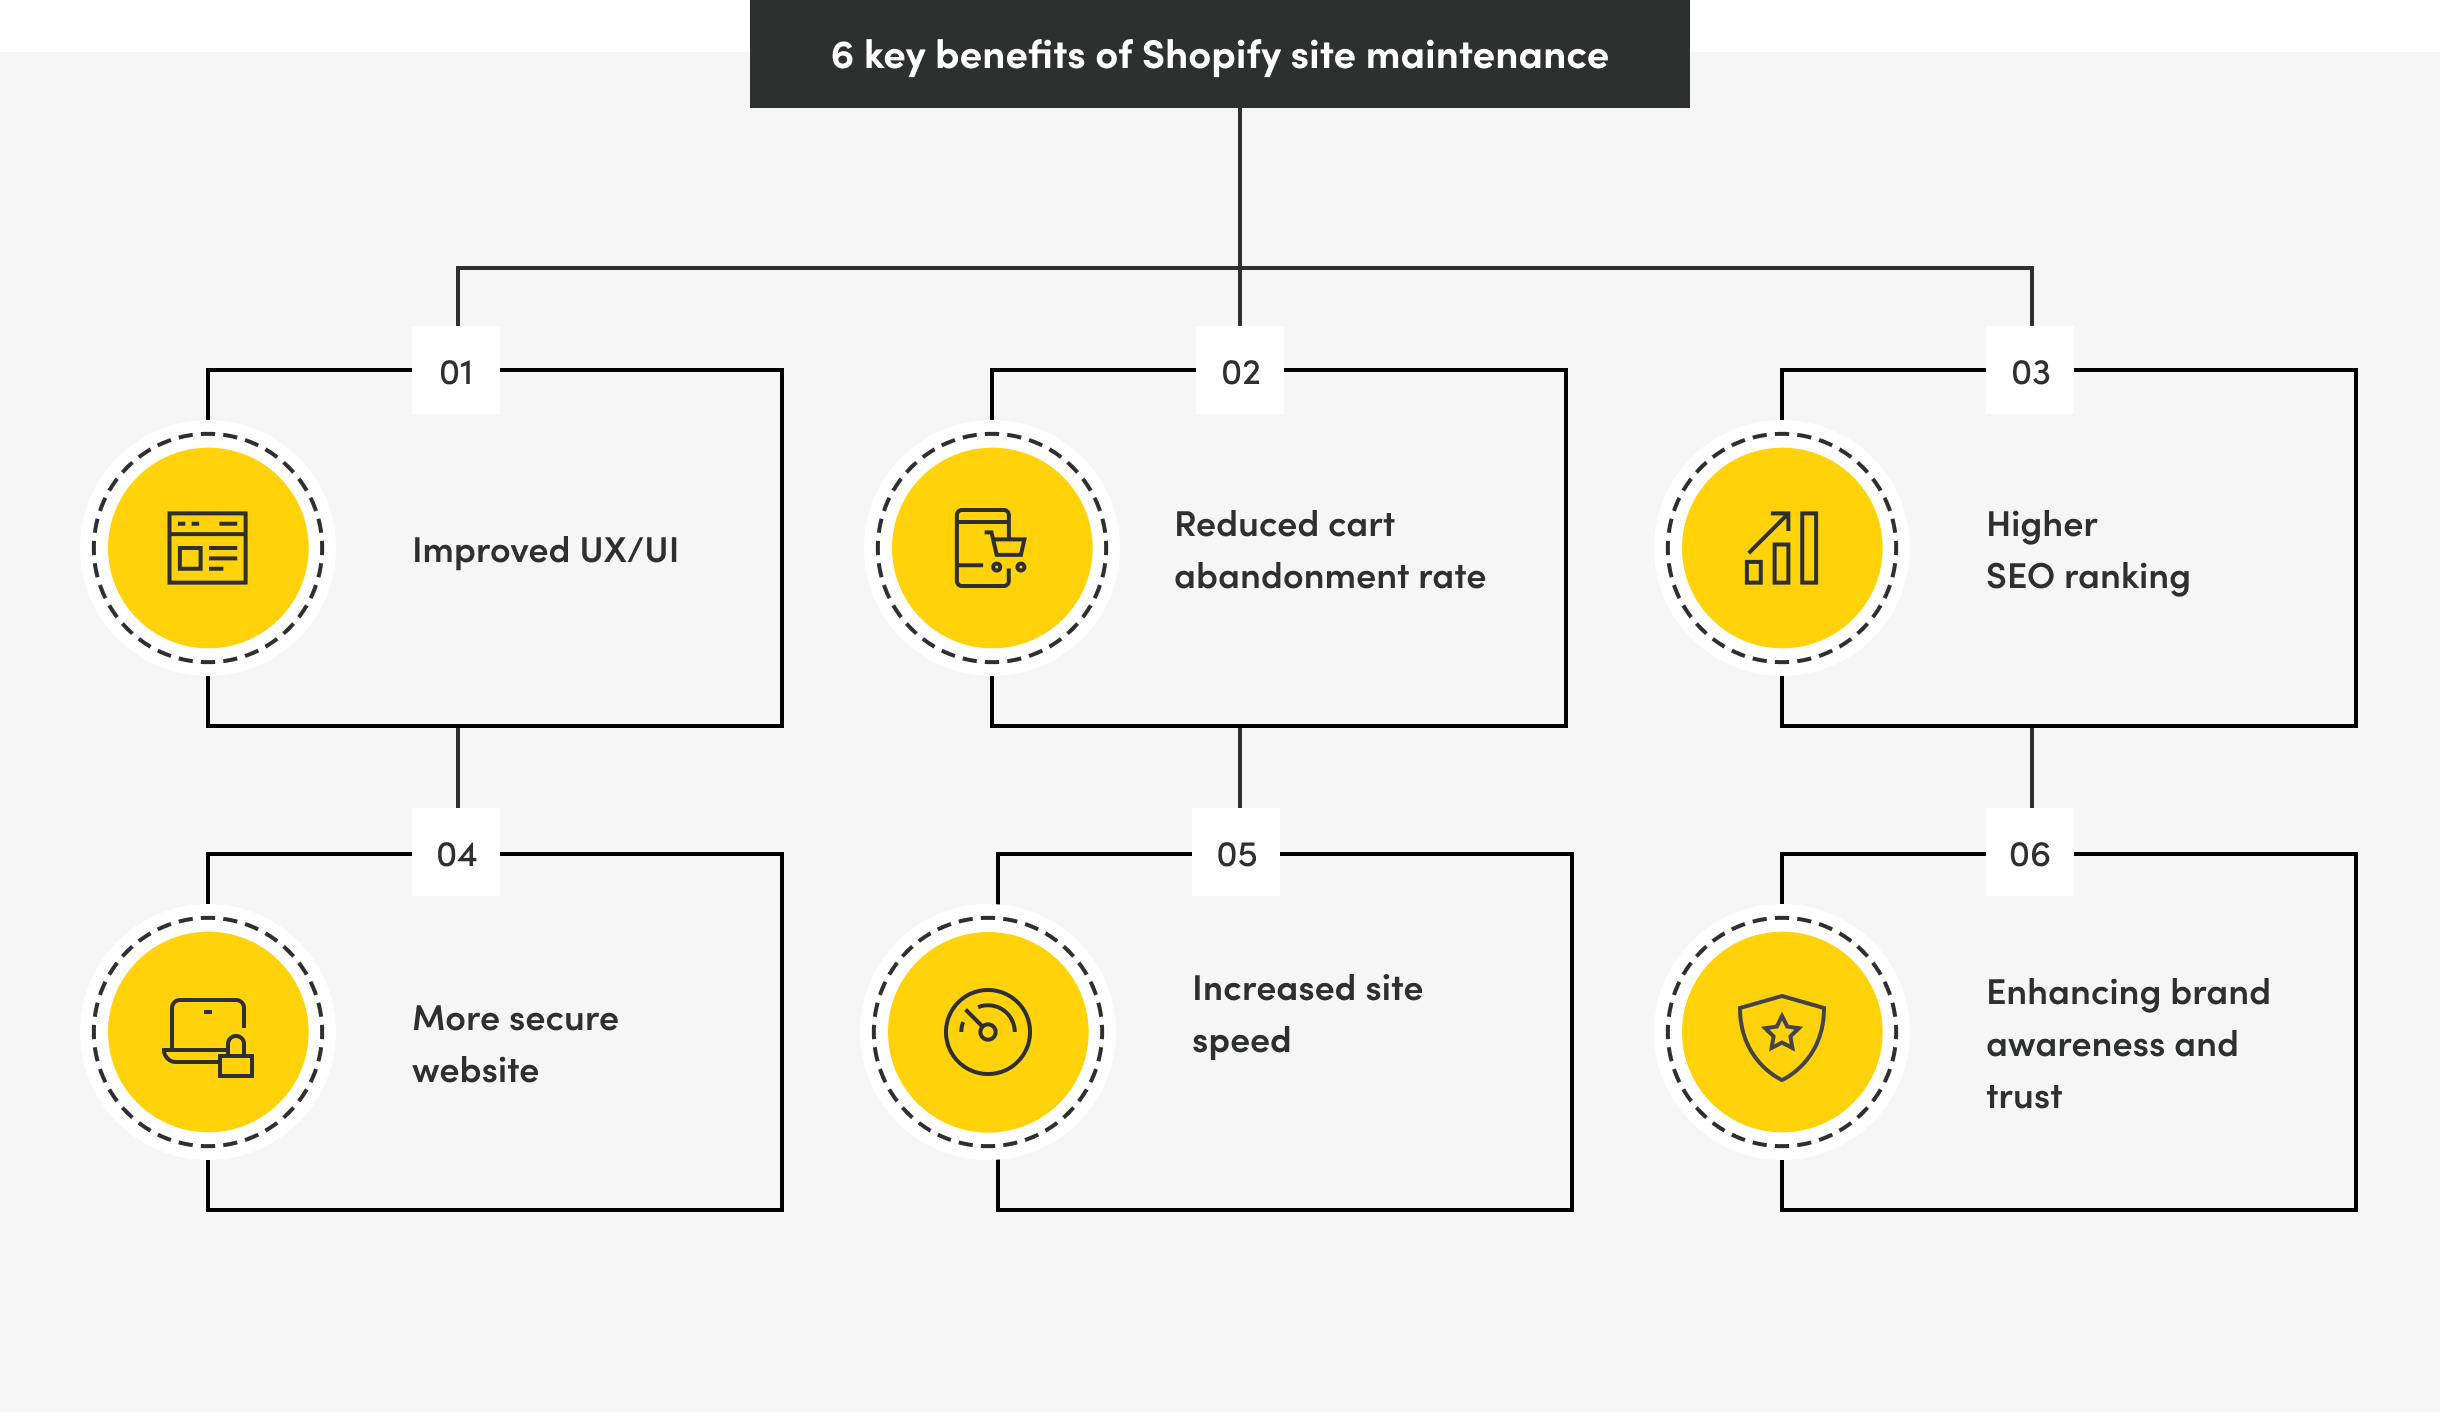 An infographic depicting 6 key benefits of Shopify Site Maintenance